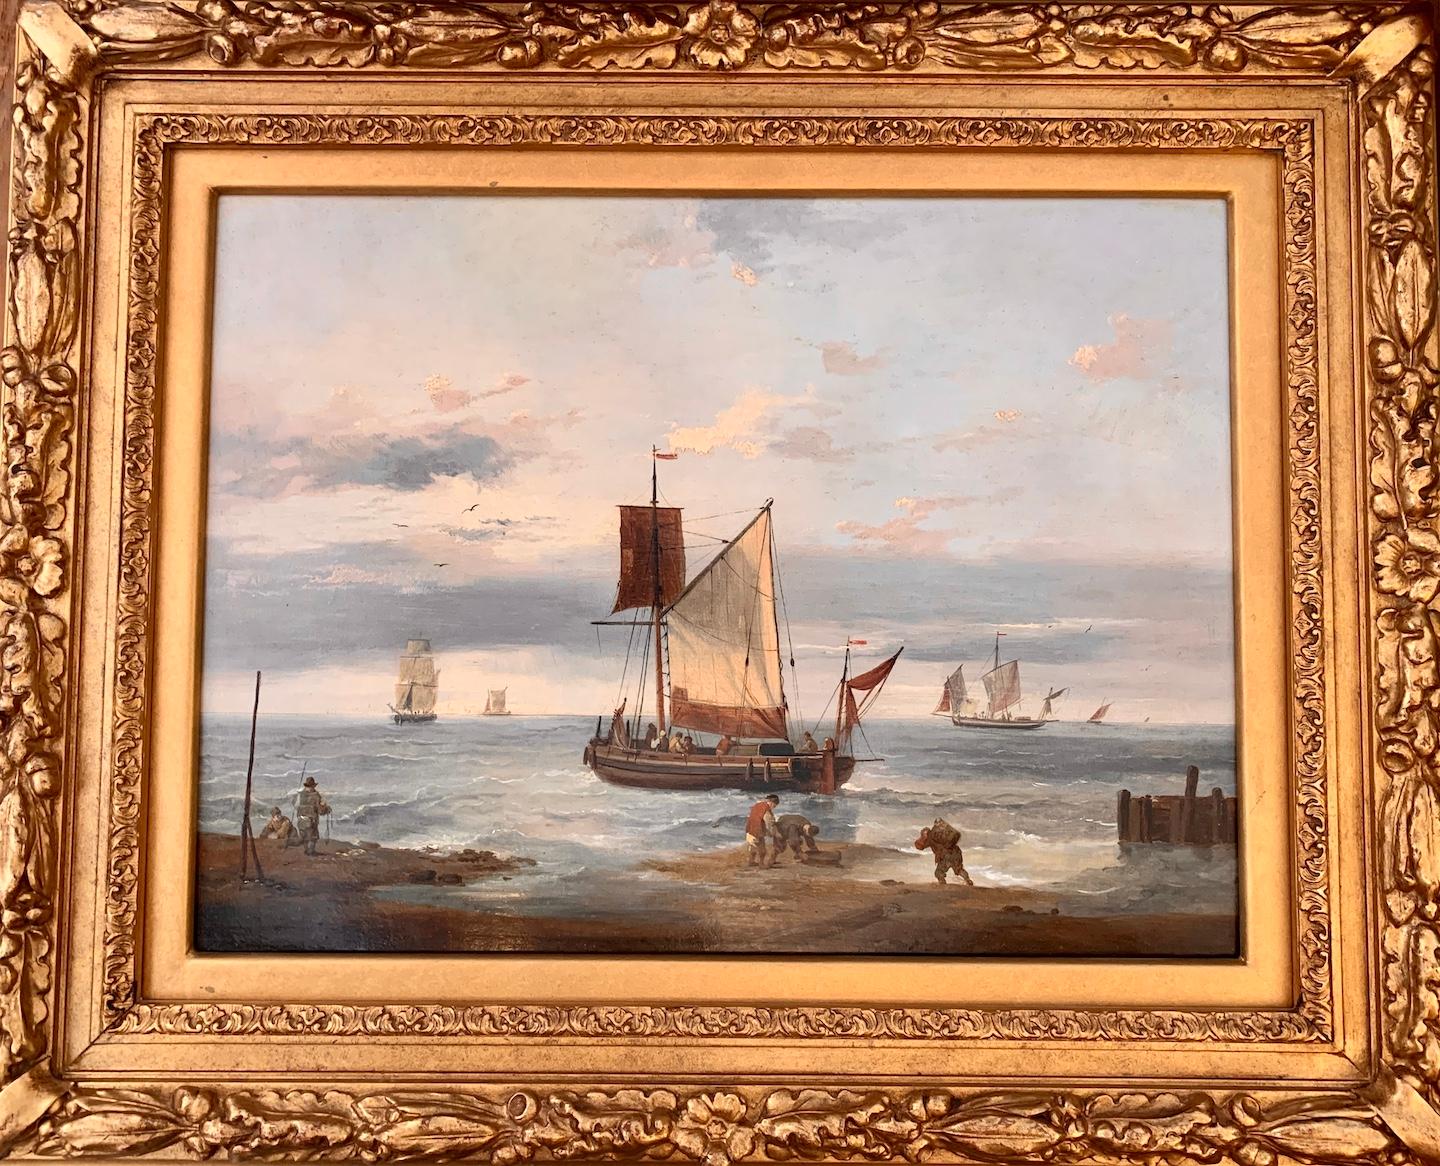 Charles Martin Powell Landscape Painting - 19th century English marine of fishing boats at sea with figures in a landscape.